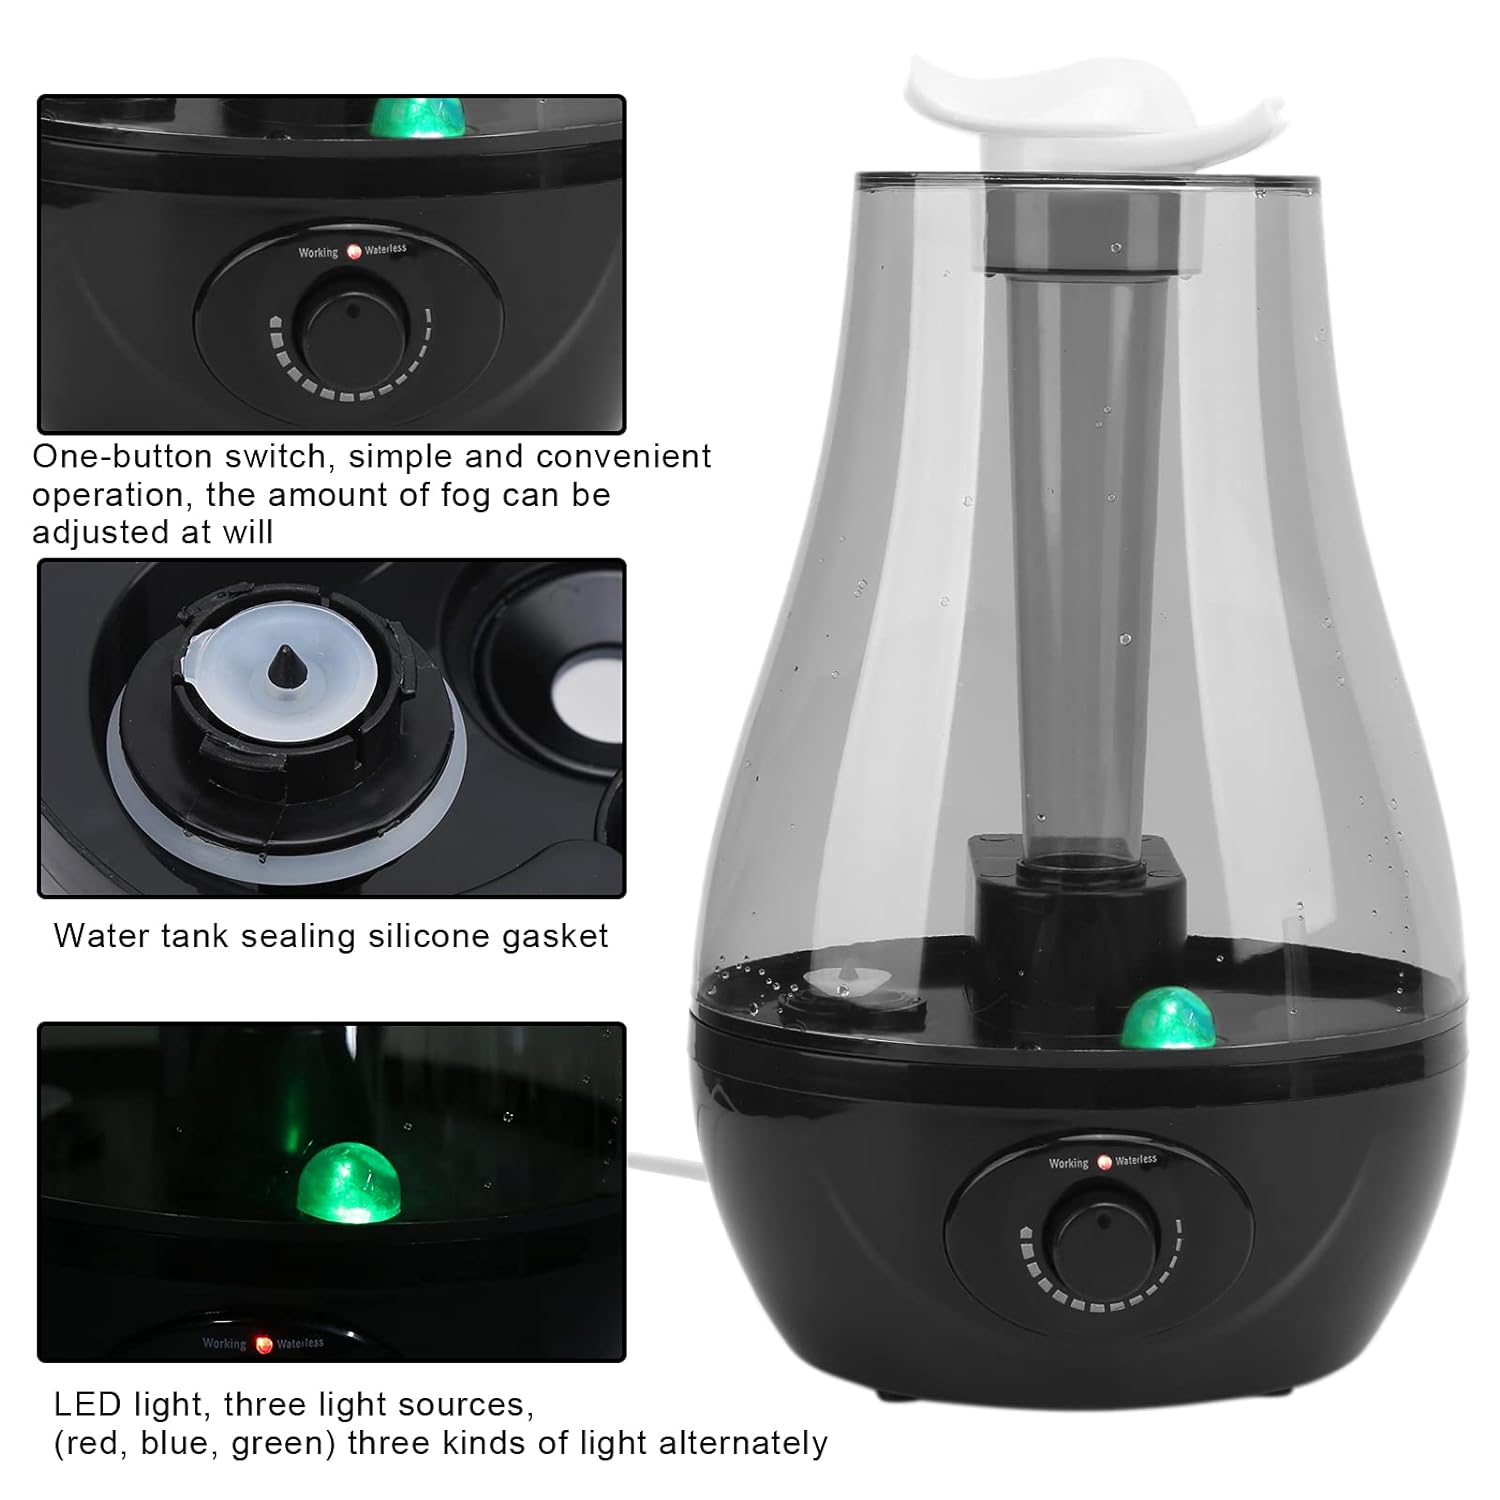 110-220v Air Humidifier Diffuser Mini Double Spray Ultrasonic Atomizer with Night Light for Home Yoga Office Bedroom Pet House(US Plug)